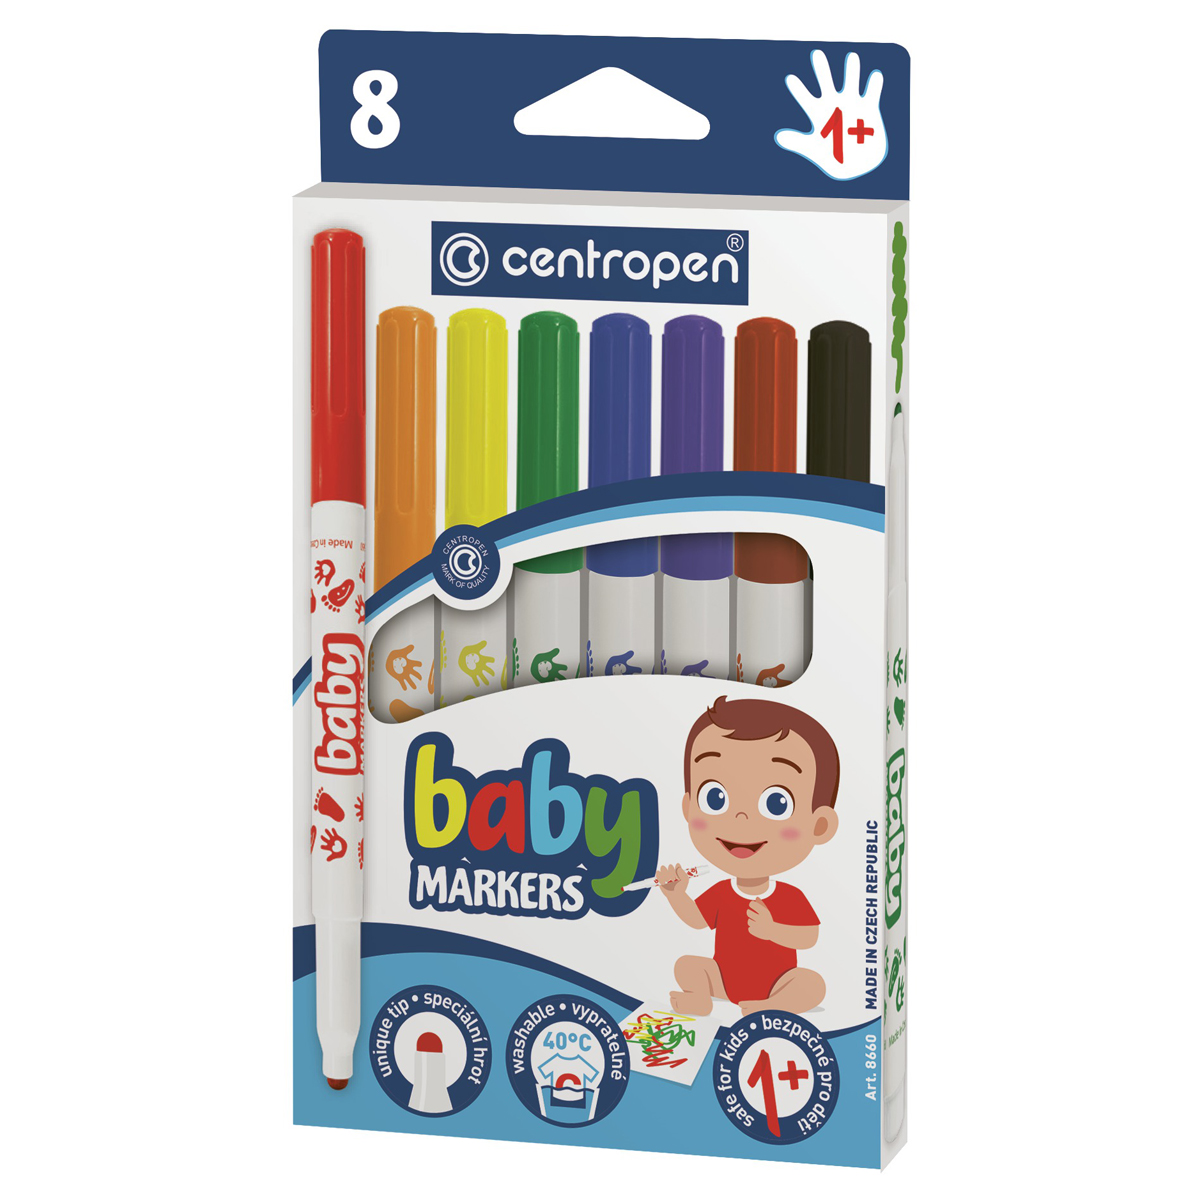  Centropen "Baby markers", 08., , , ,  